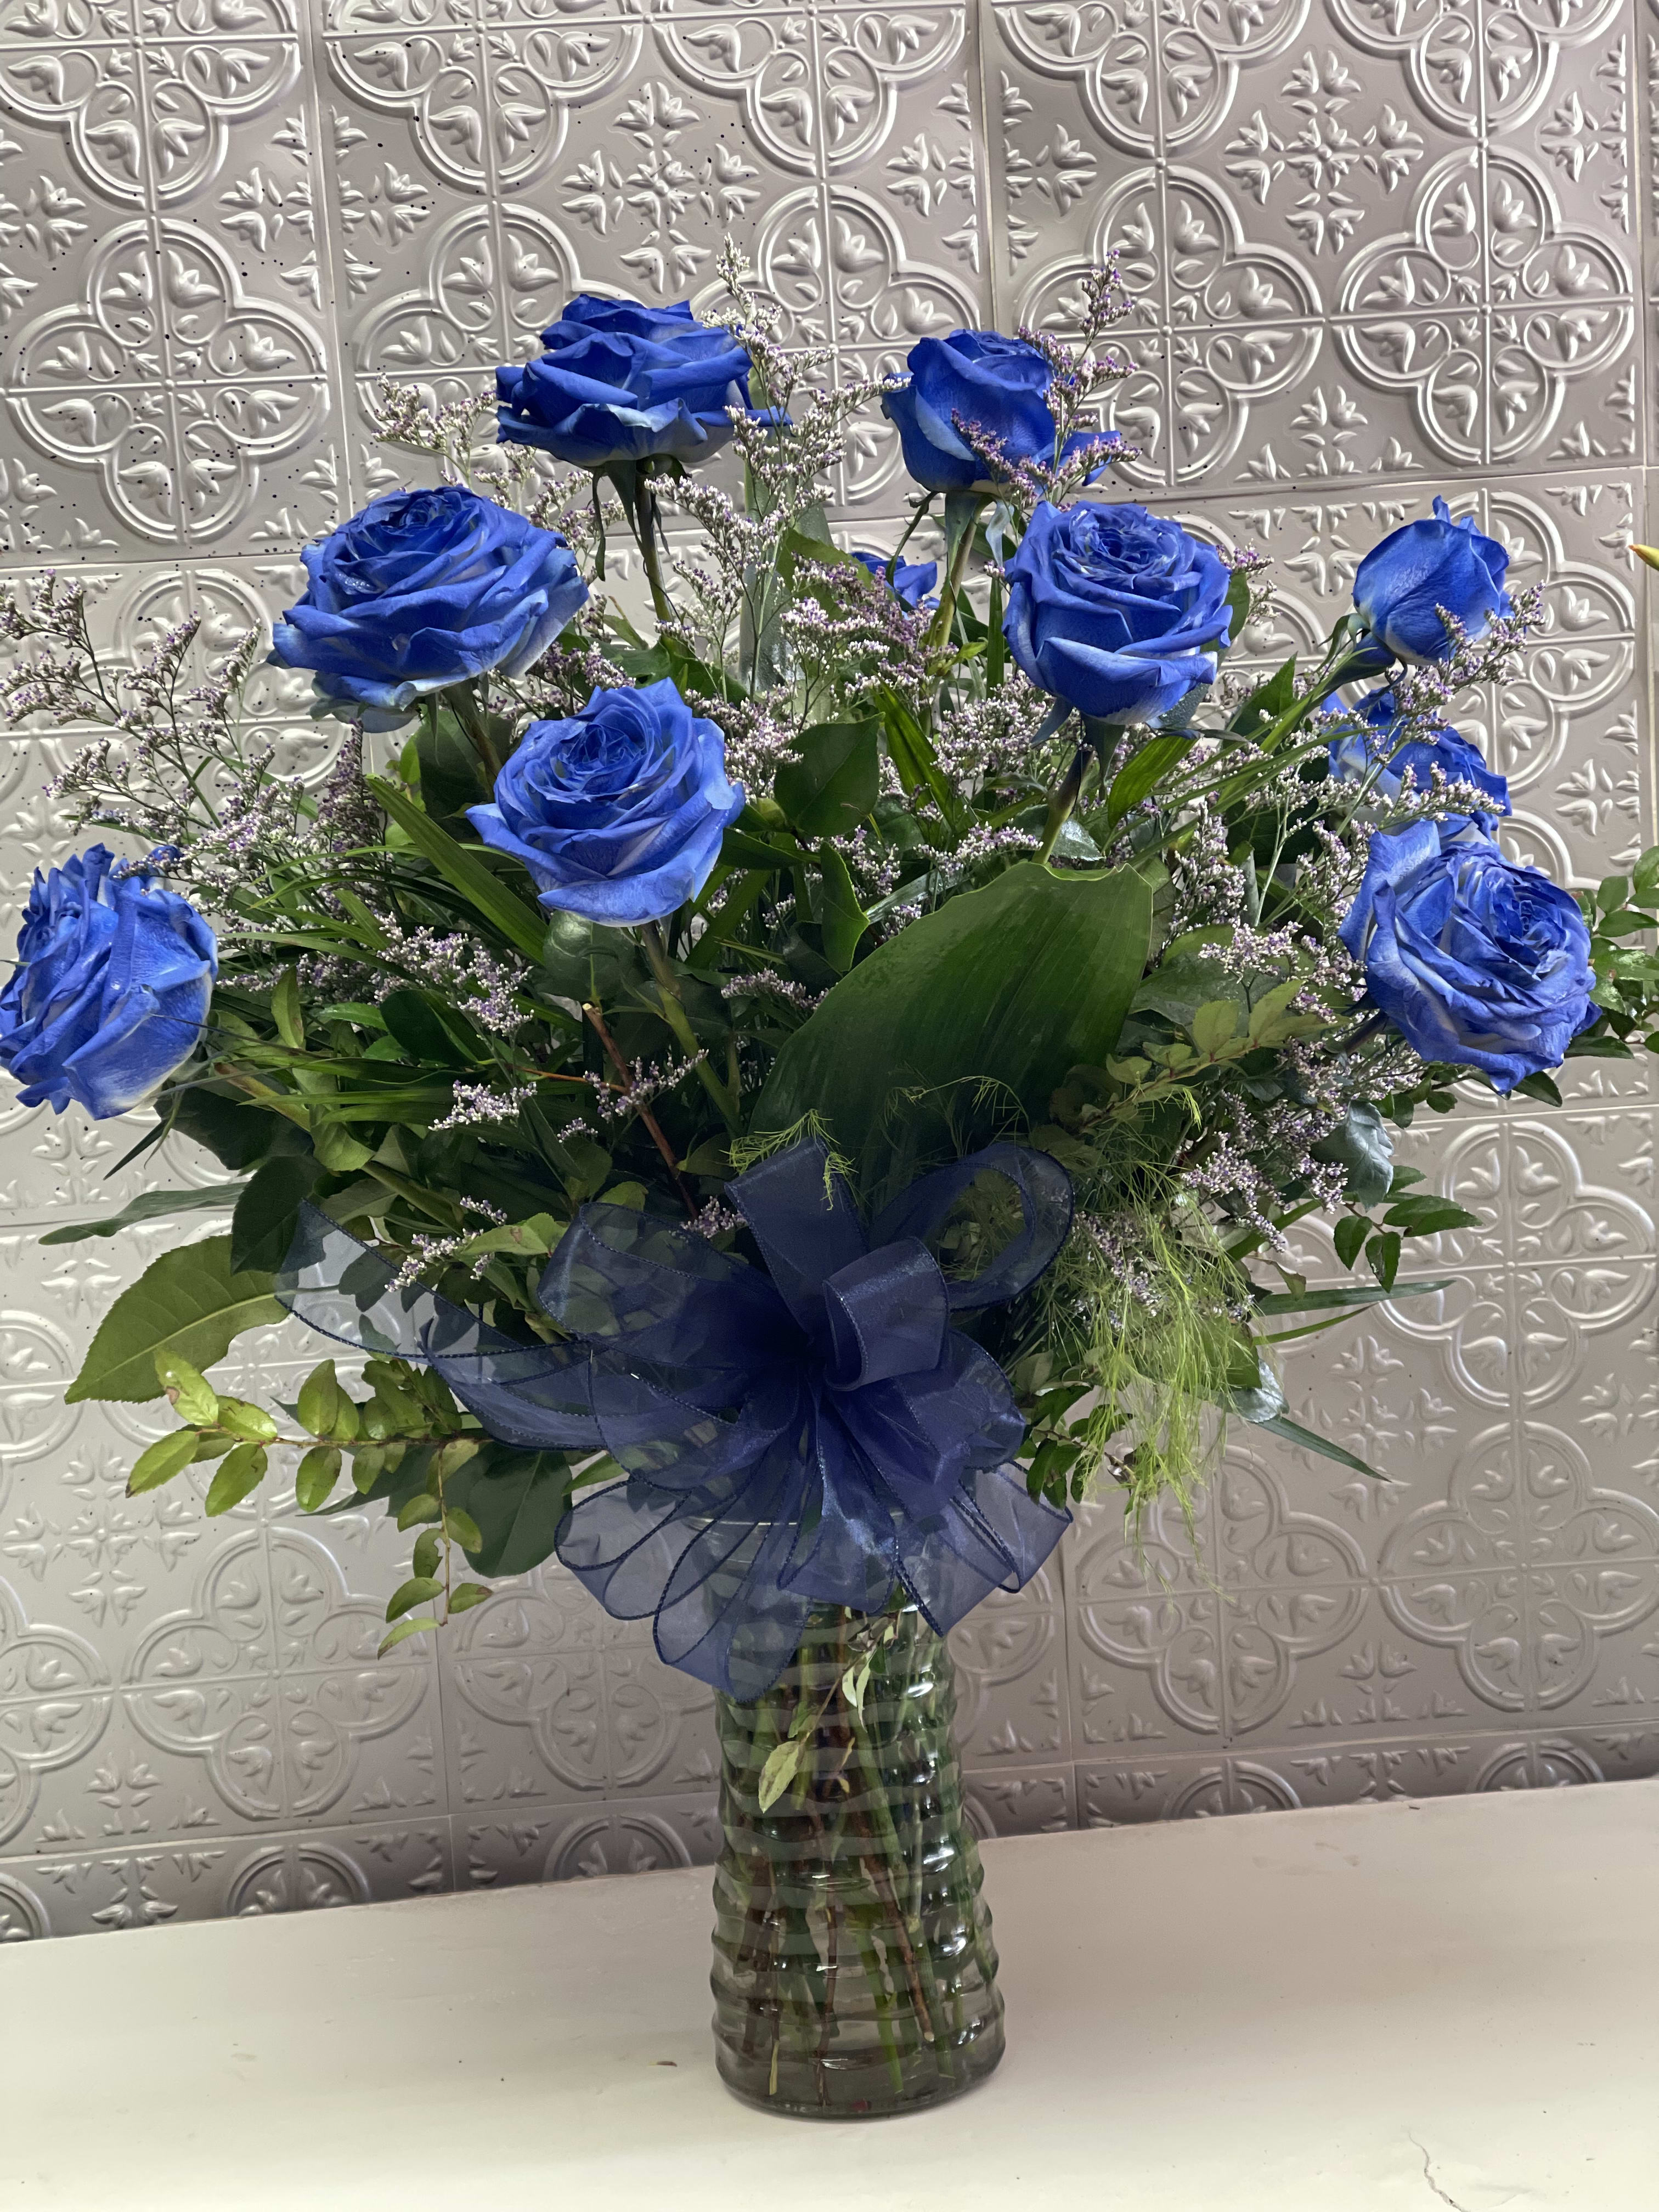 Sparkle Blue Roses - Blue tinted roses for any occasion . Standard 12, deluxe 18 and premium 24 